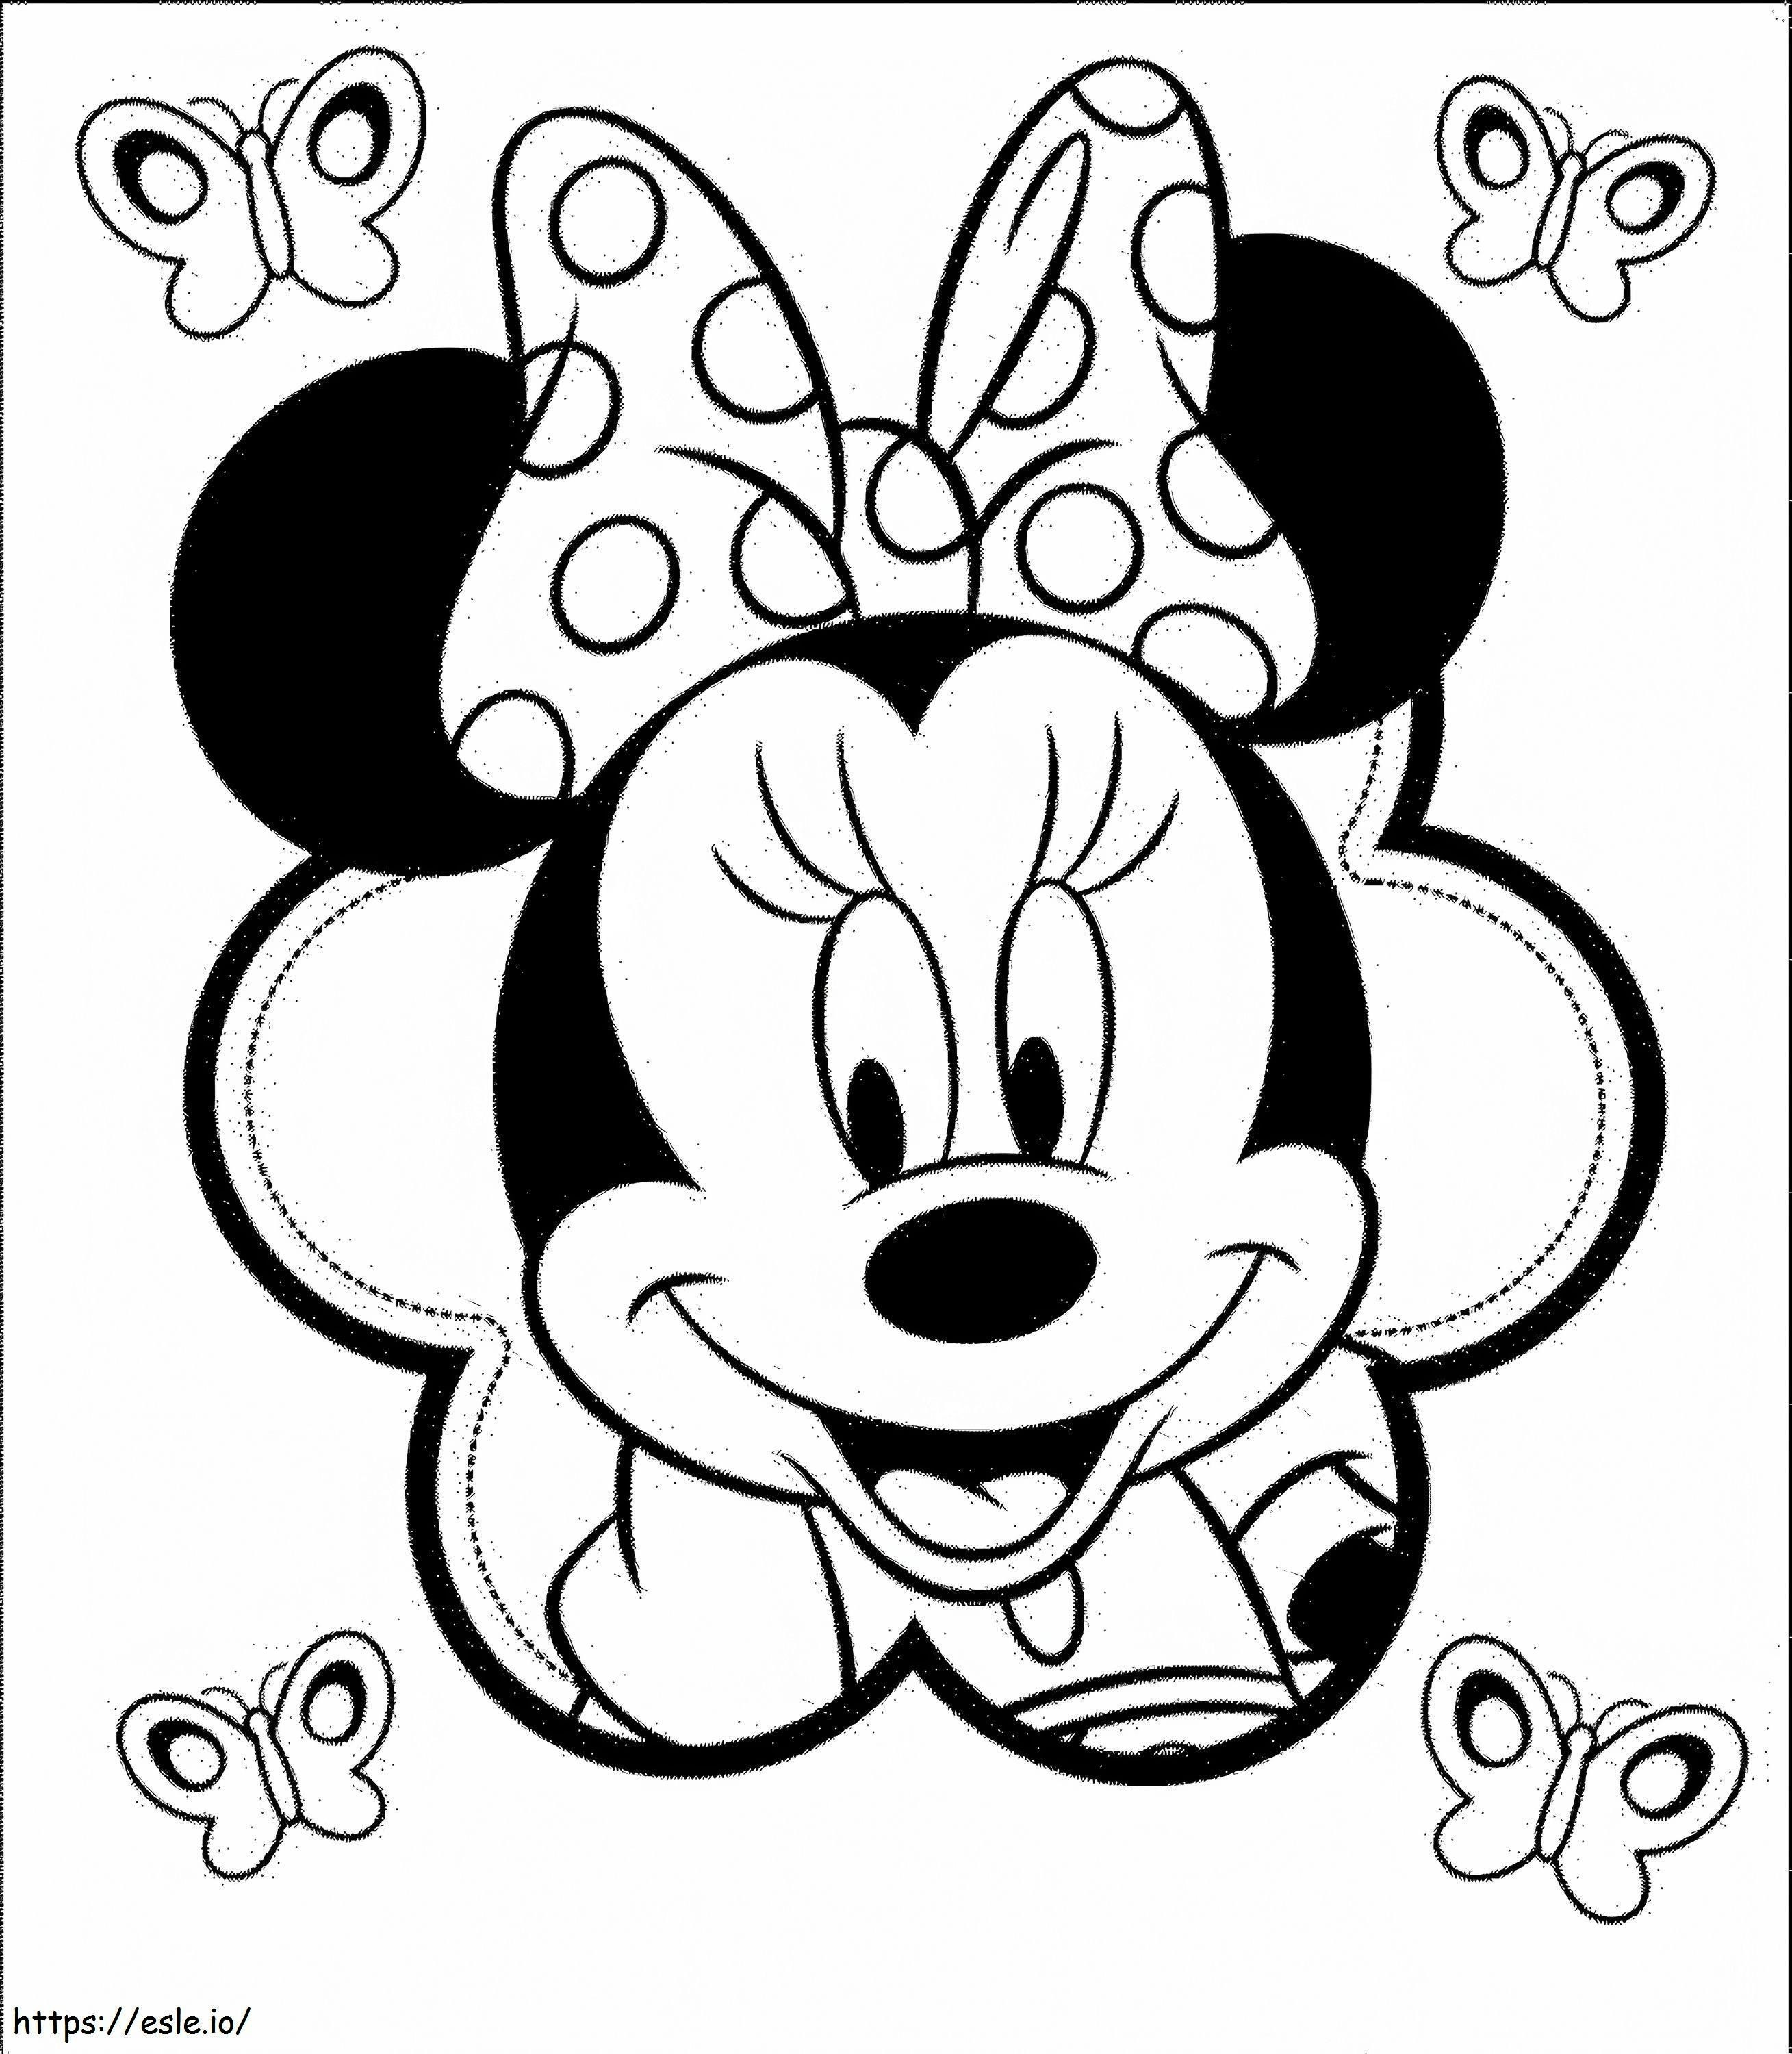 Minnie Mouse With Butterflies coloring page